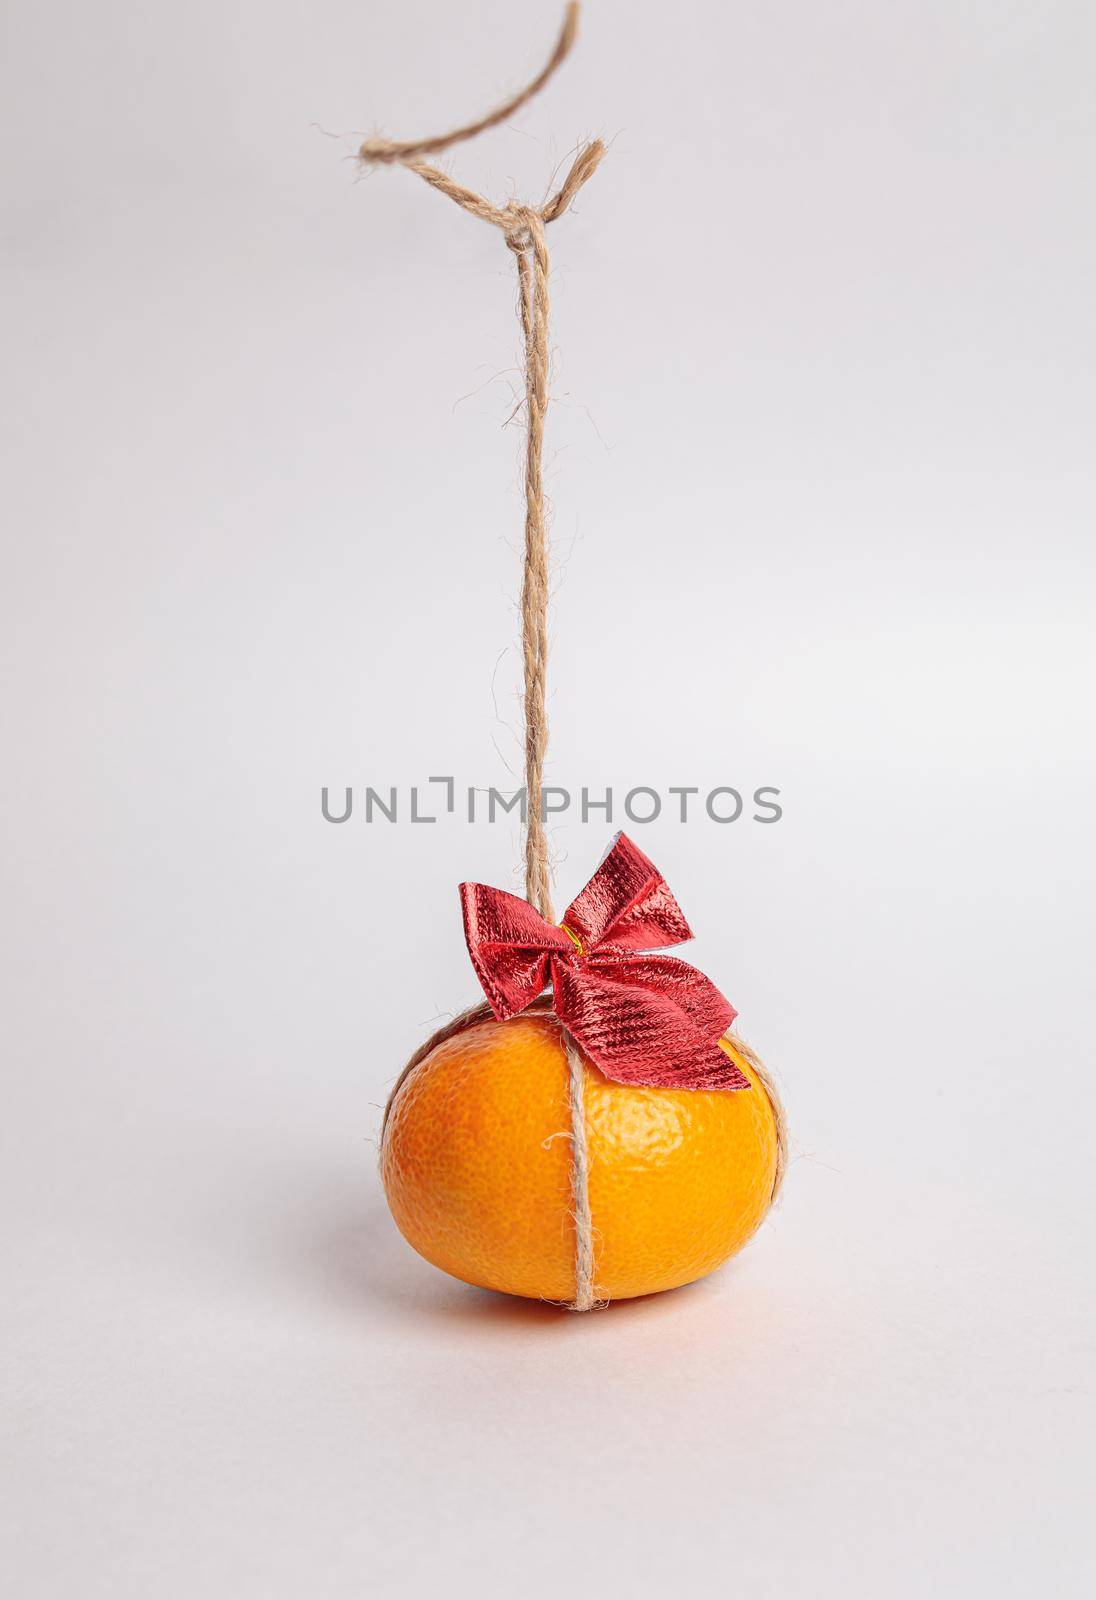 Festive tangerine with a red bow hanging from a rope. by Yurich32